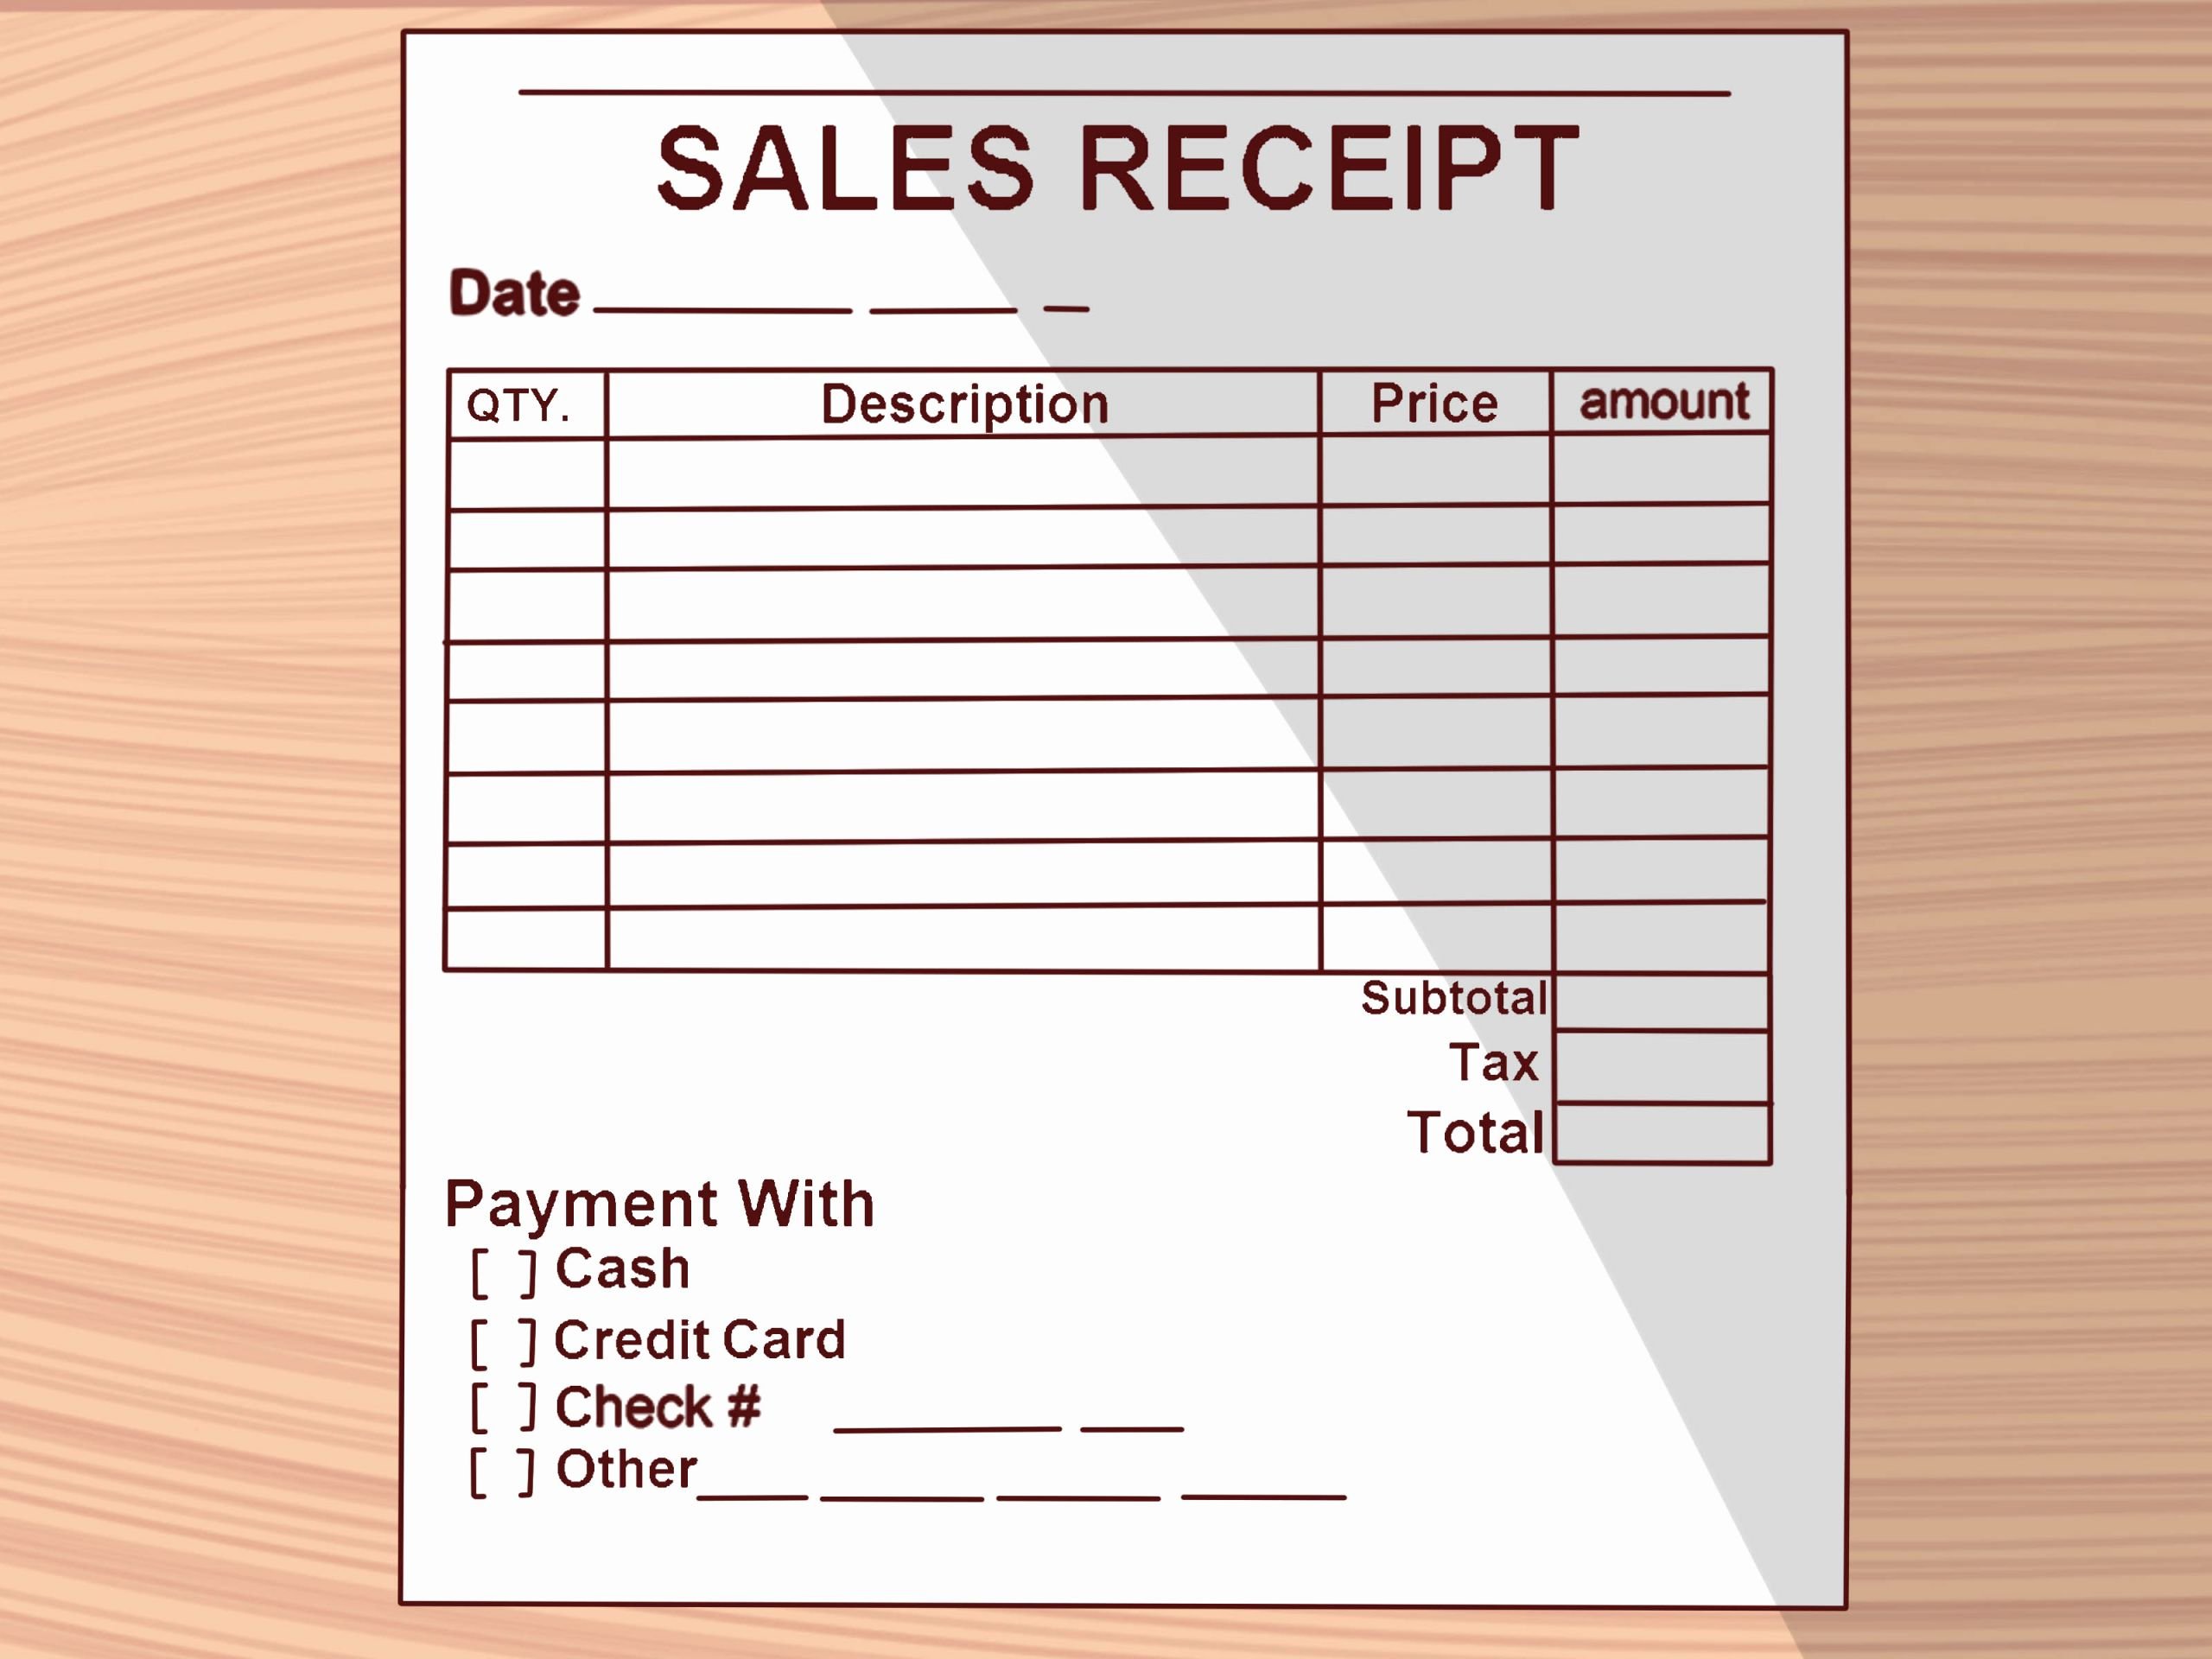 Restaurant Receipts Maker Elegant How to Write A Receipt 9 Steps with Wikihow